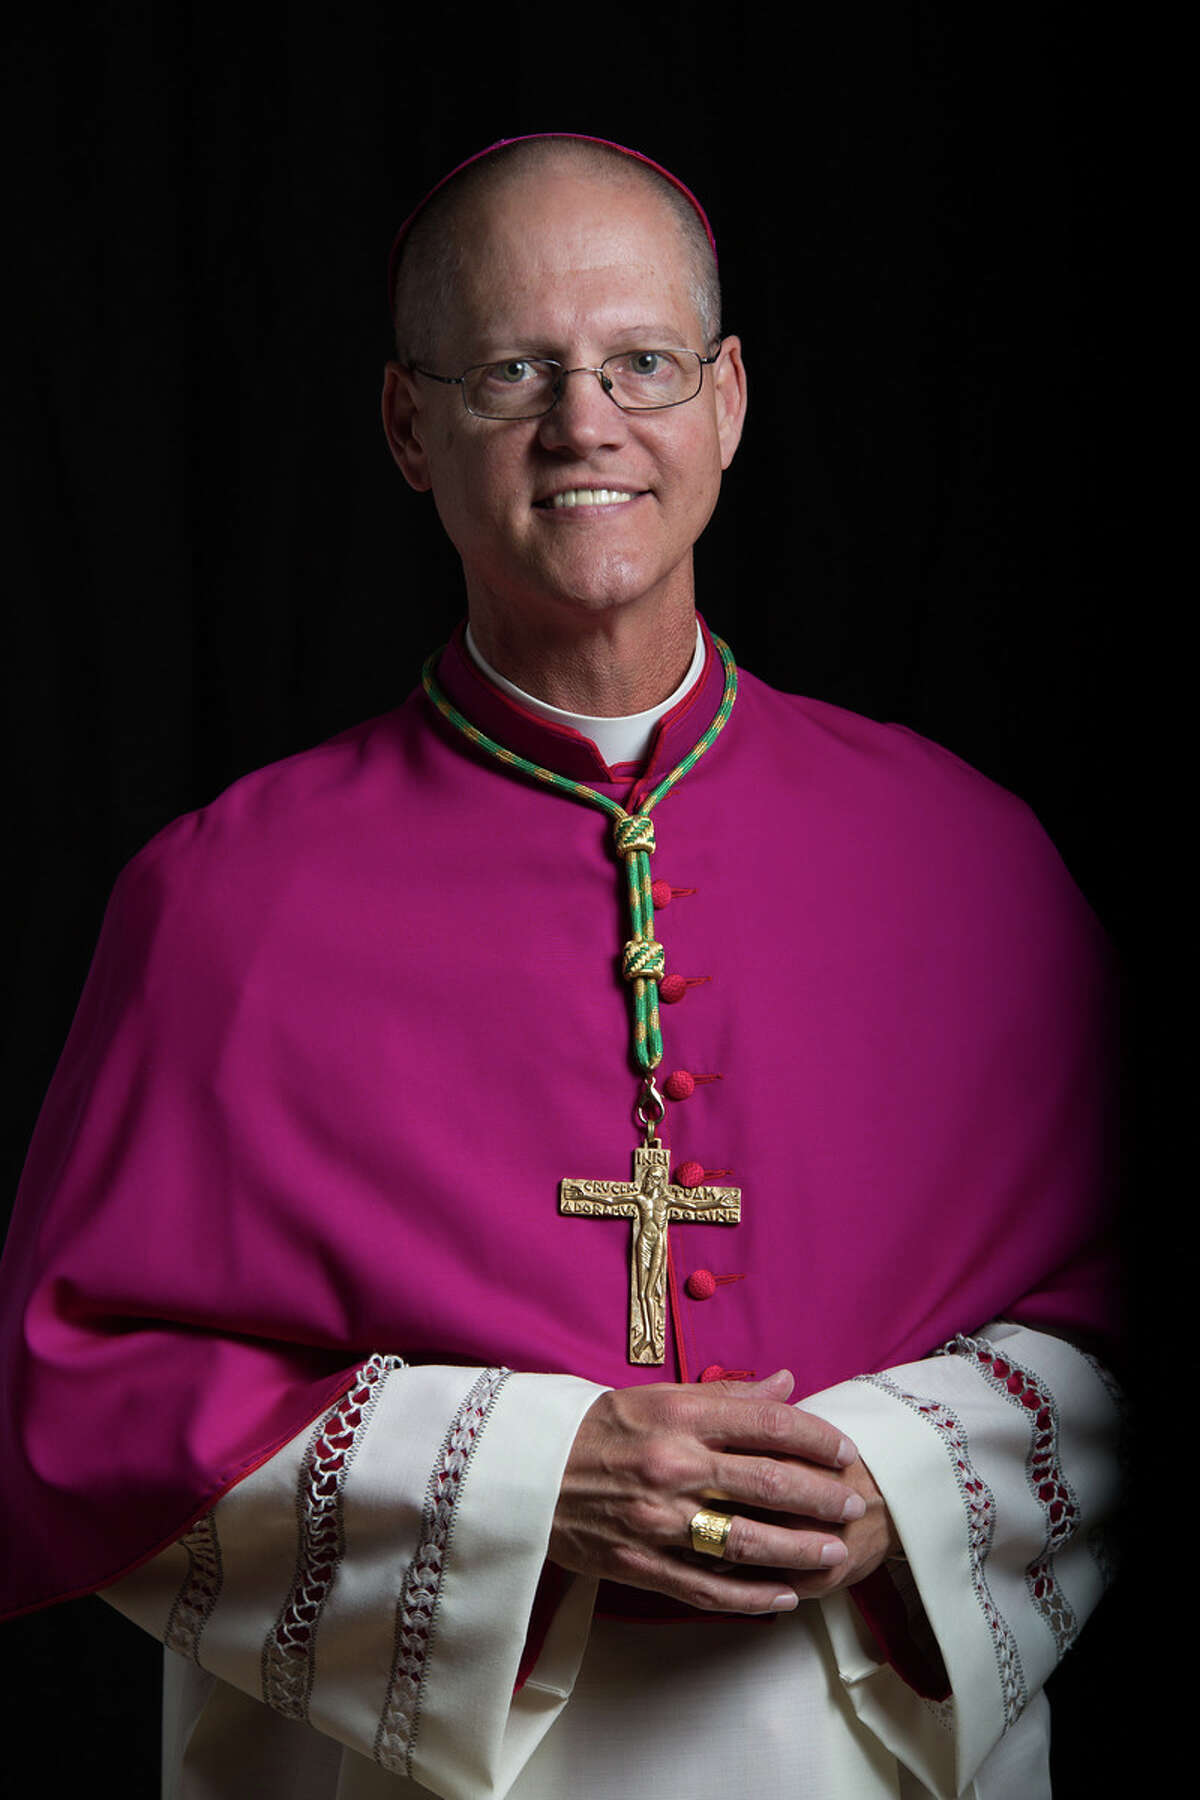 Seattle Archbishop Paul Etienne: Mass was suspended not out of fear, but "out of our deepest respect for human life and health."